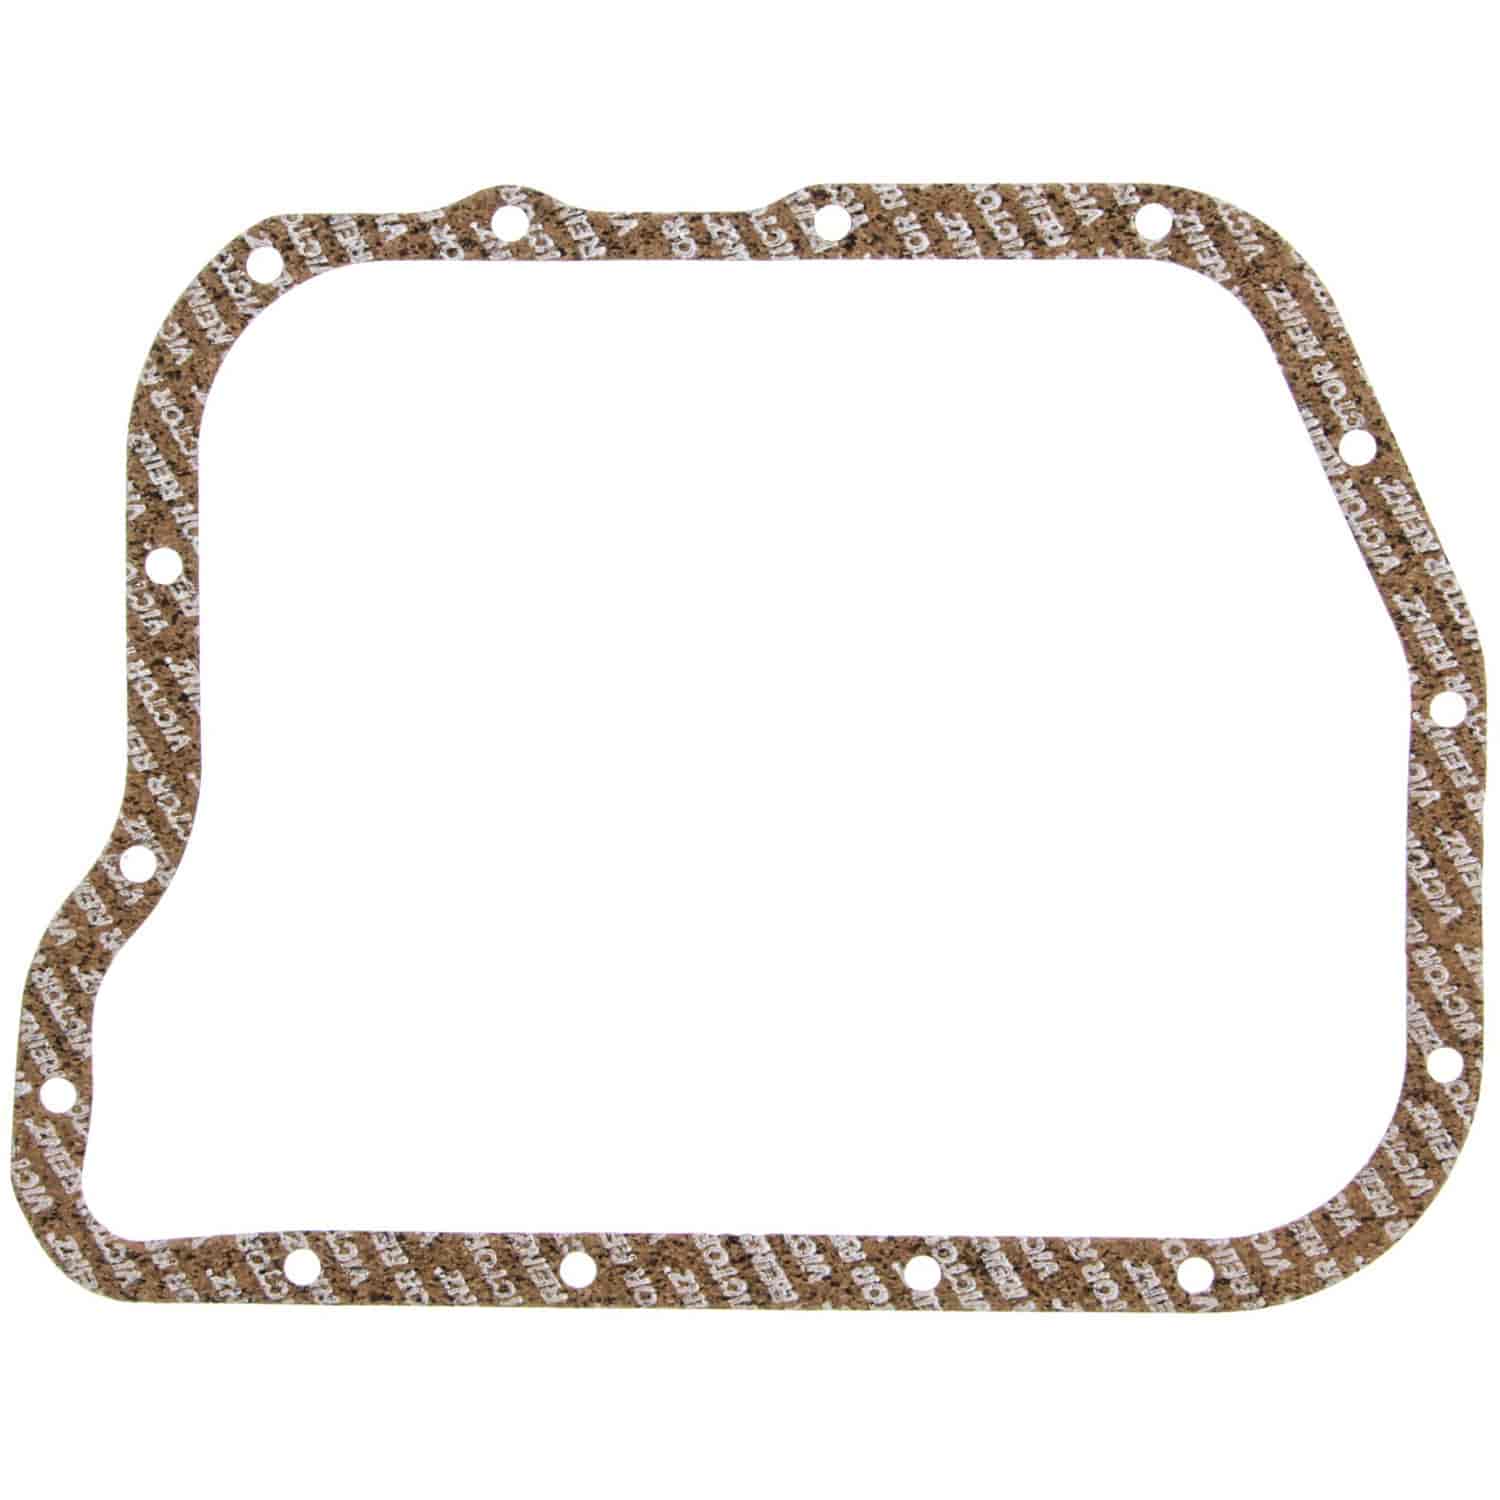 Automatic Transmission Gasket 1962-2003 Chrysler A727/T307 in